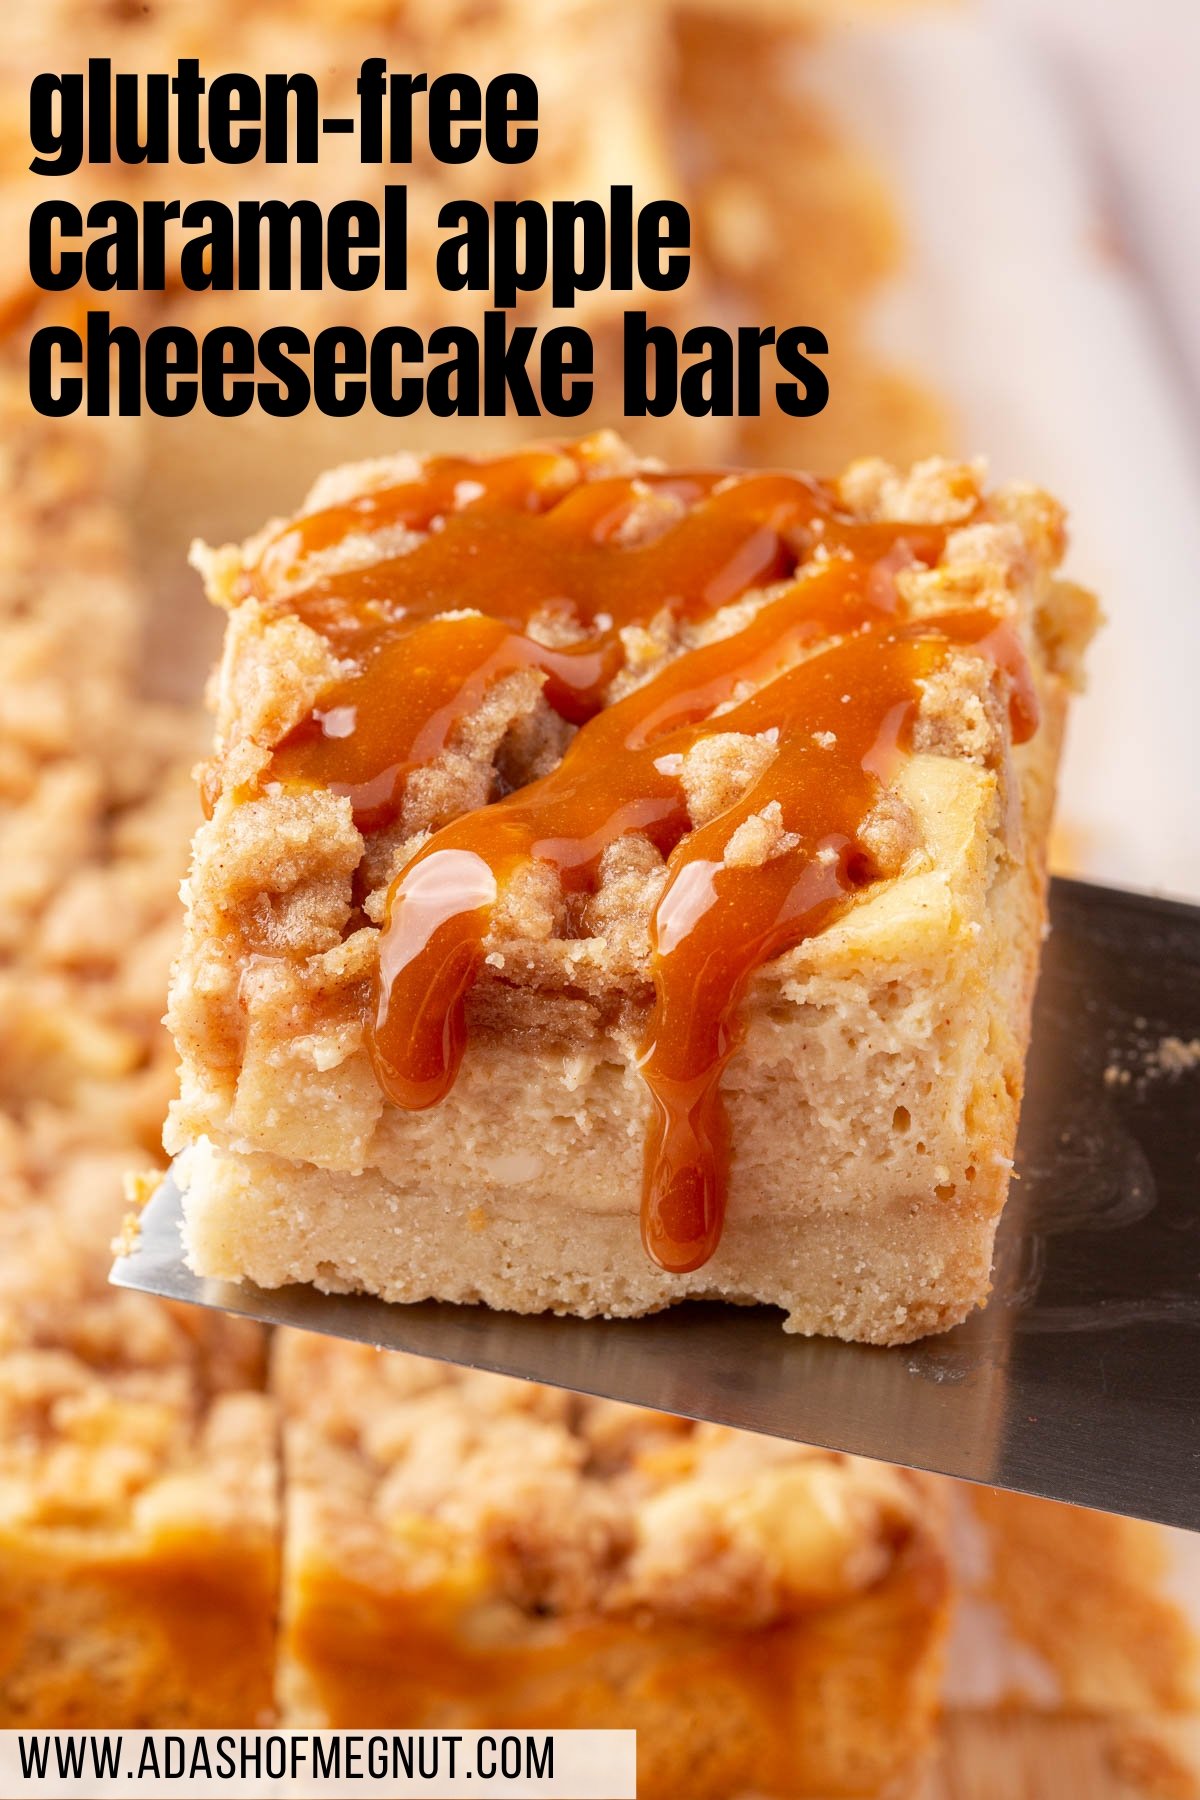 A metal spatula lifting a gluten-free cheesecake bar with apples and cinnamon streusel from a large pan.